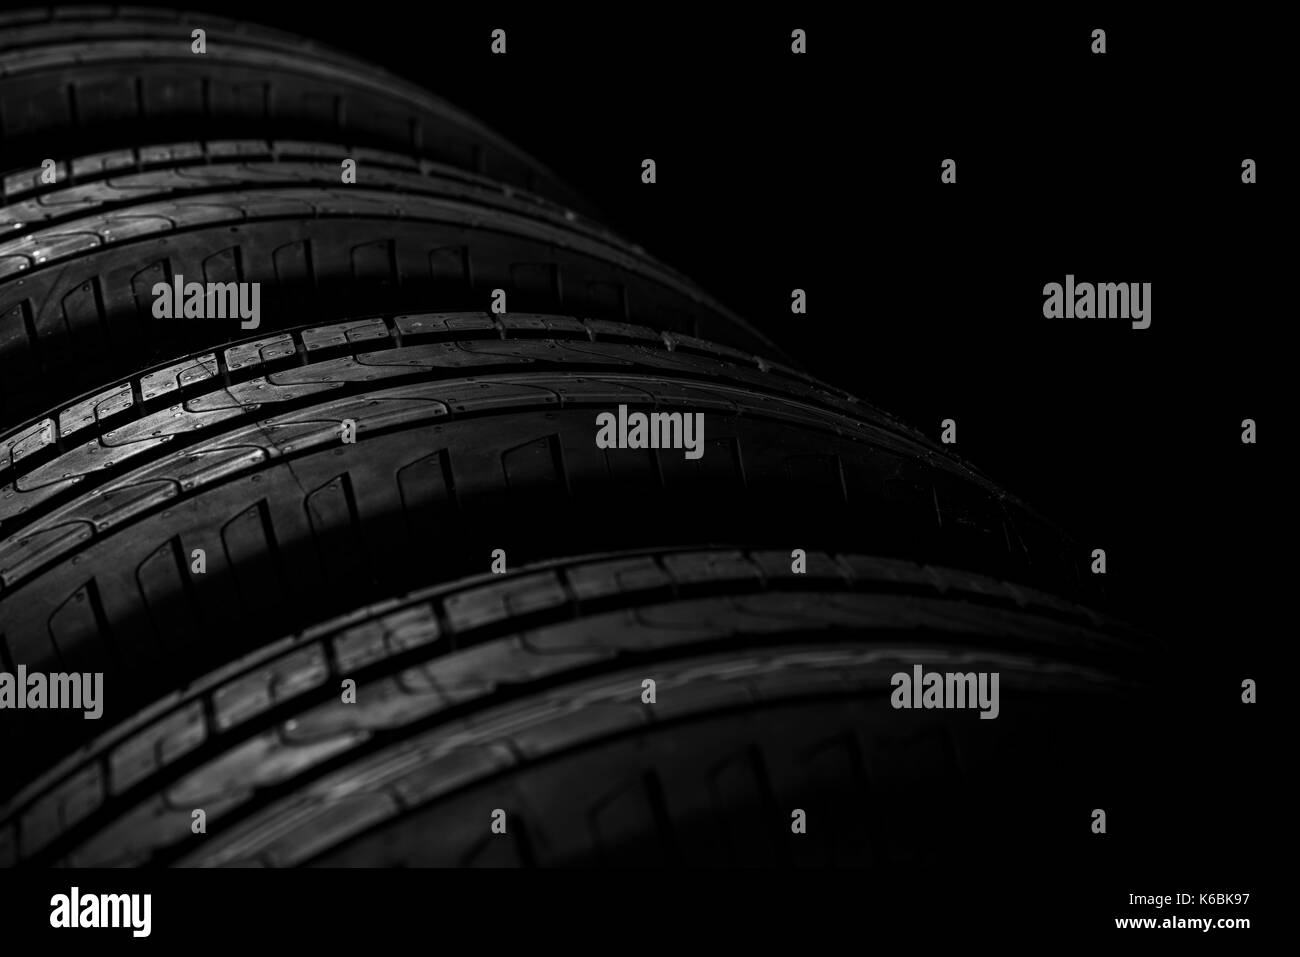 Tire stack on background. Selective focus.Wheel Pattern Stock Photo